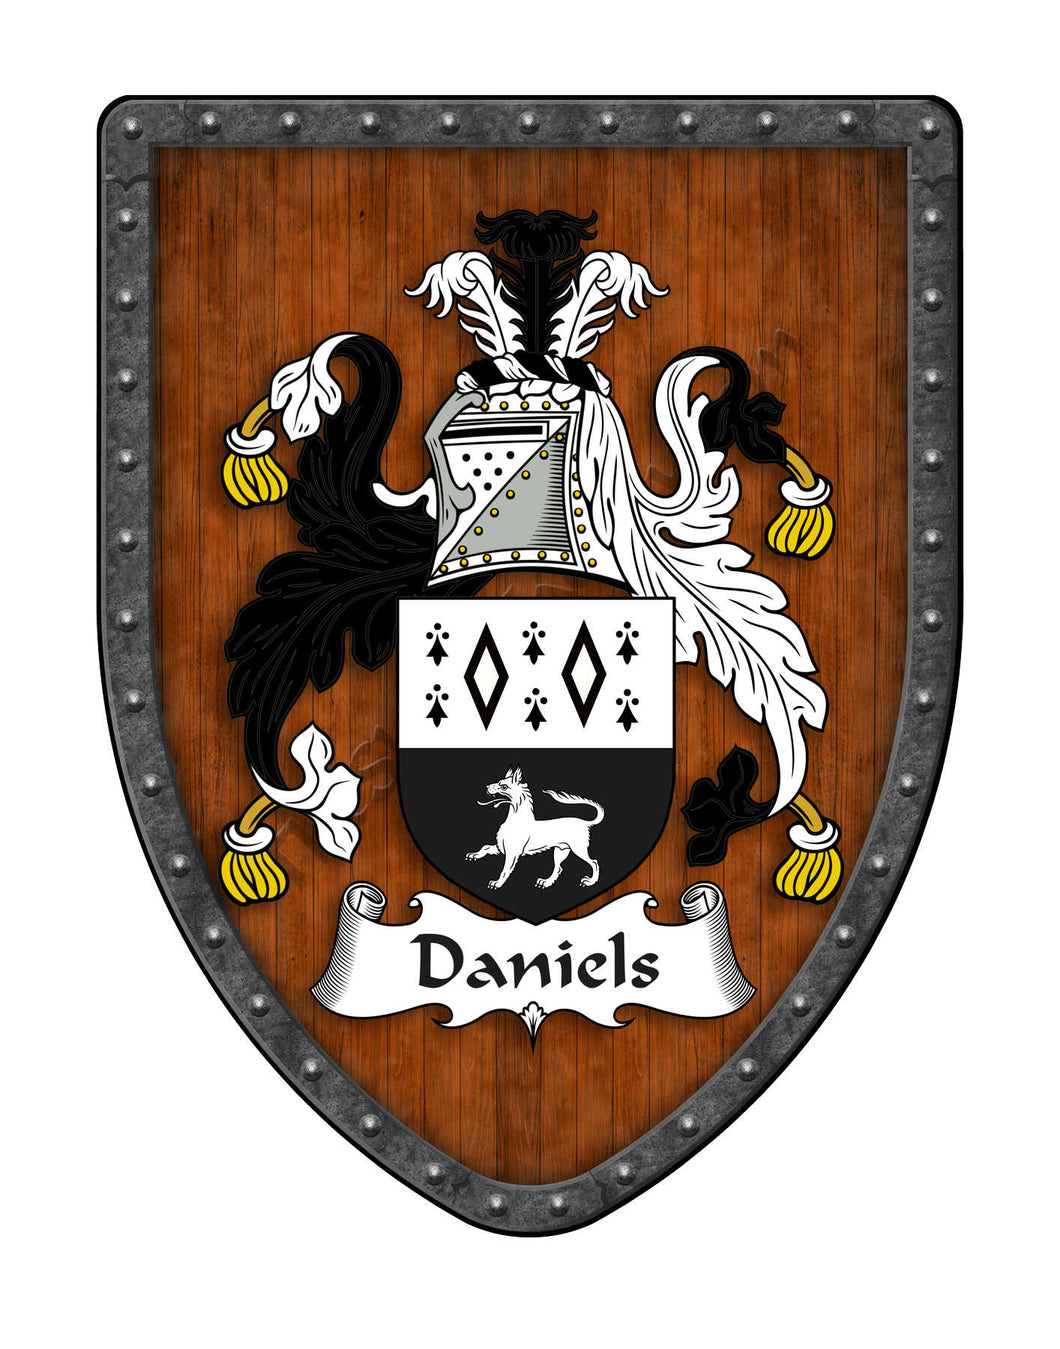 Daniels Coat of Arms Shield Family Crest